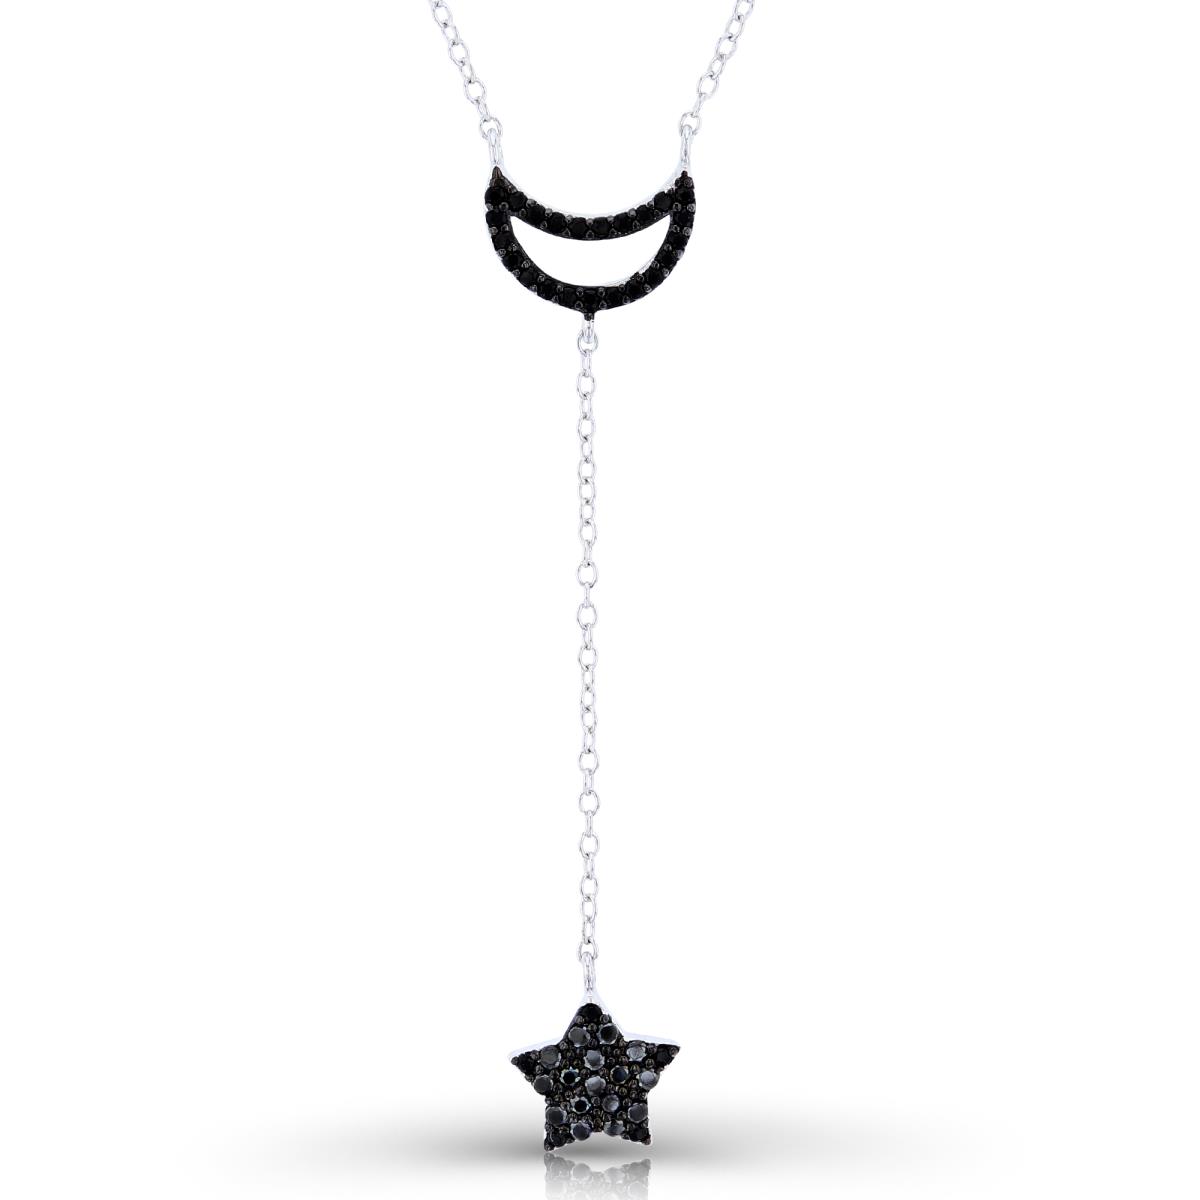 Sterling Silver Two-Tone Rnd Black Spinel Moon with Star Dangling on 1.5"Spool 16+2"Necklace